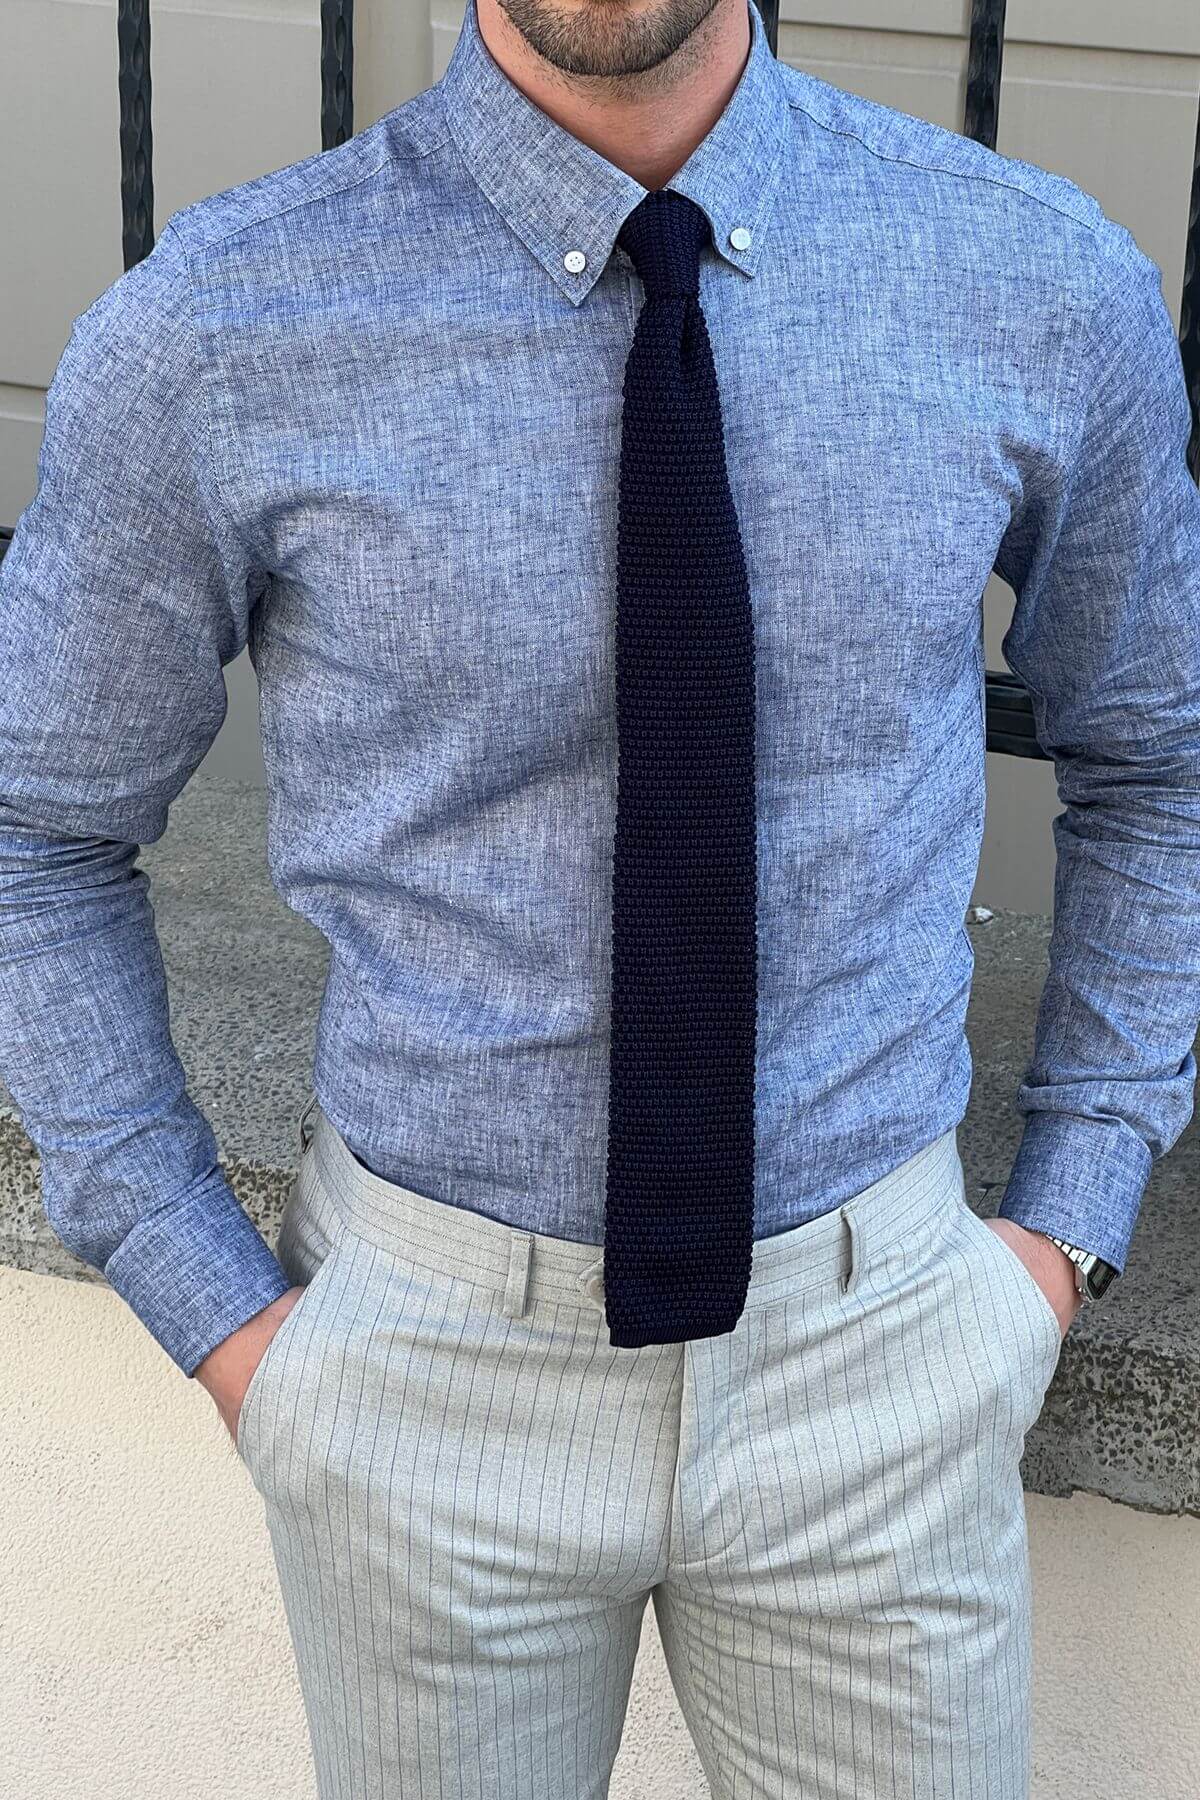 A Slim-Fit Blue Cotton Shirt on display